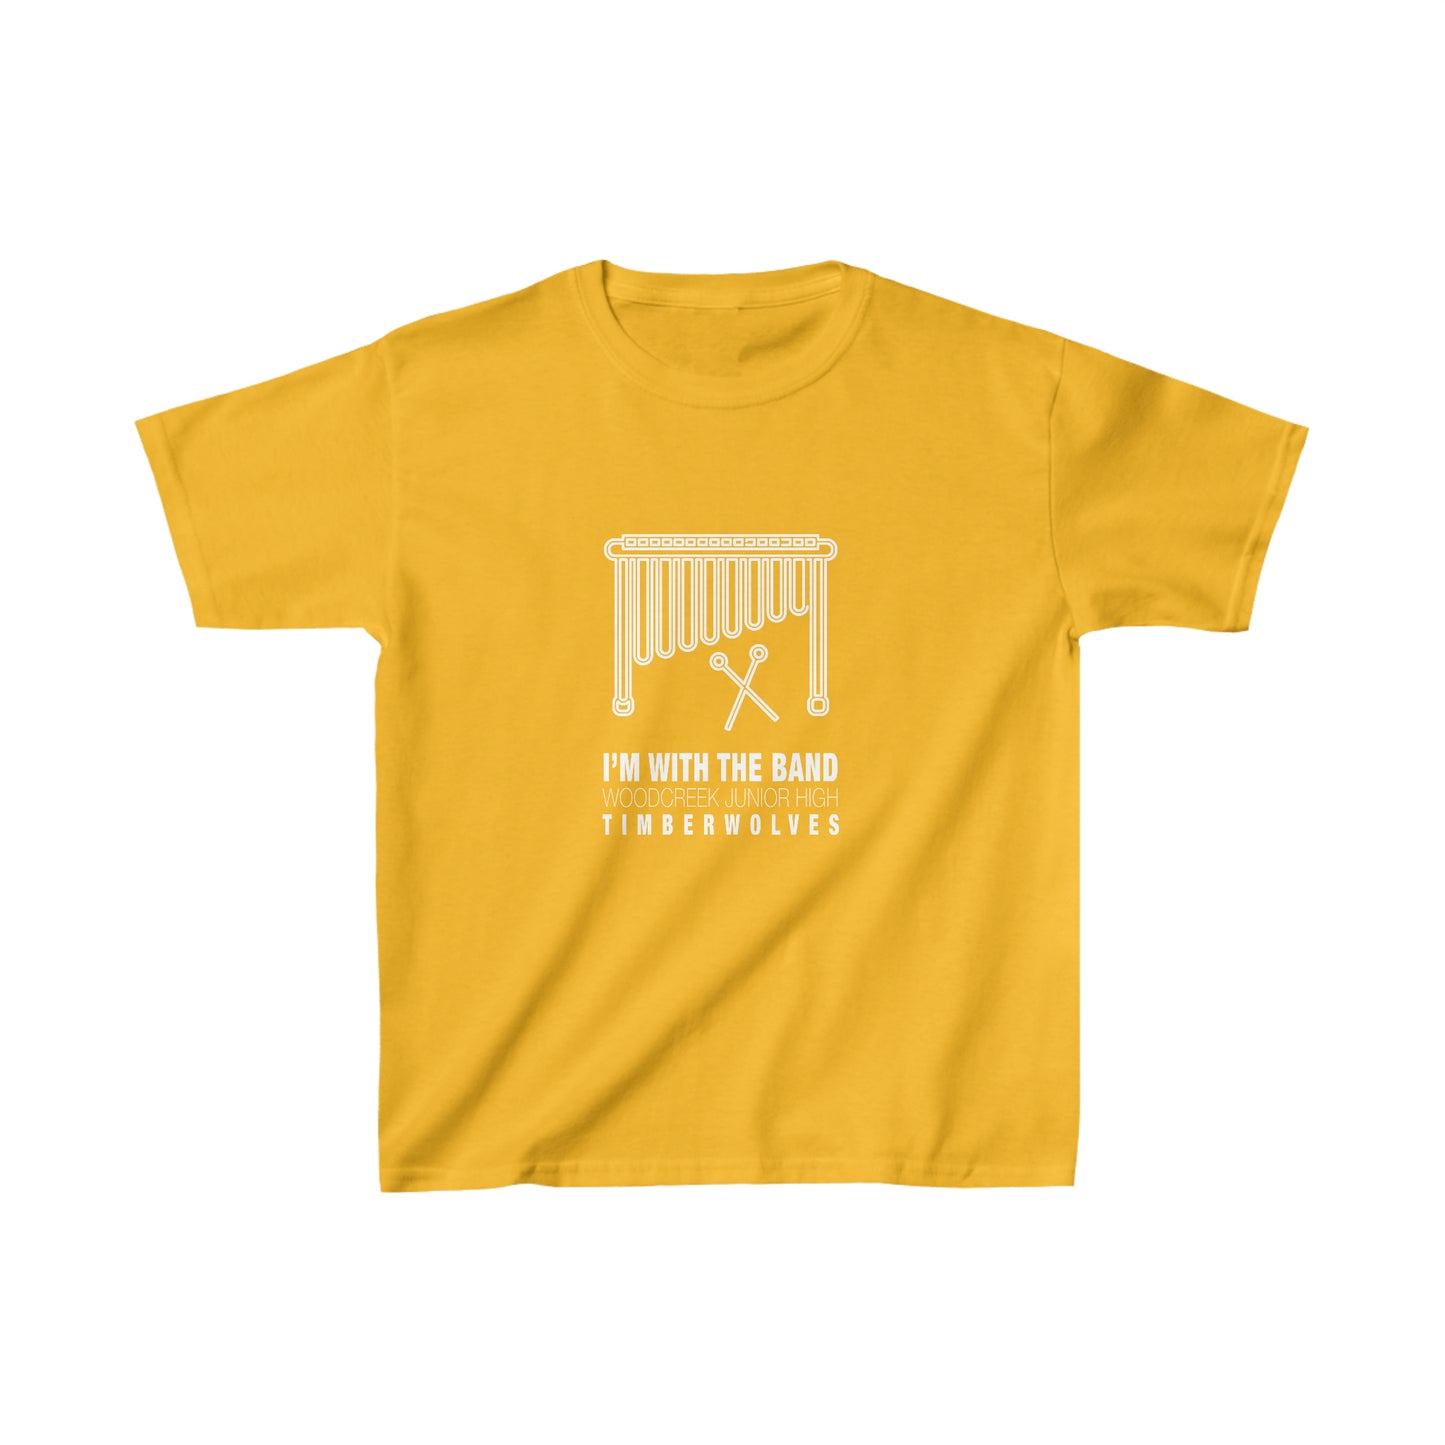 WCJH - I'M WITH THE BAND Youth Marimba Tee (13 color options)